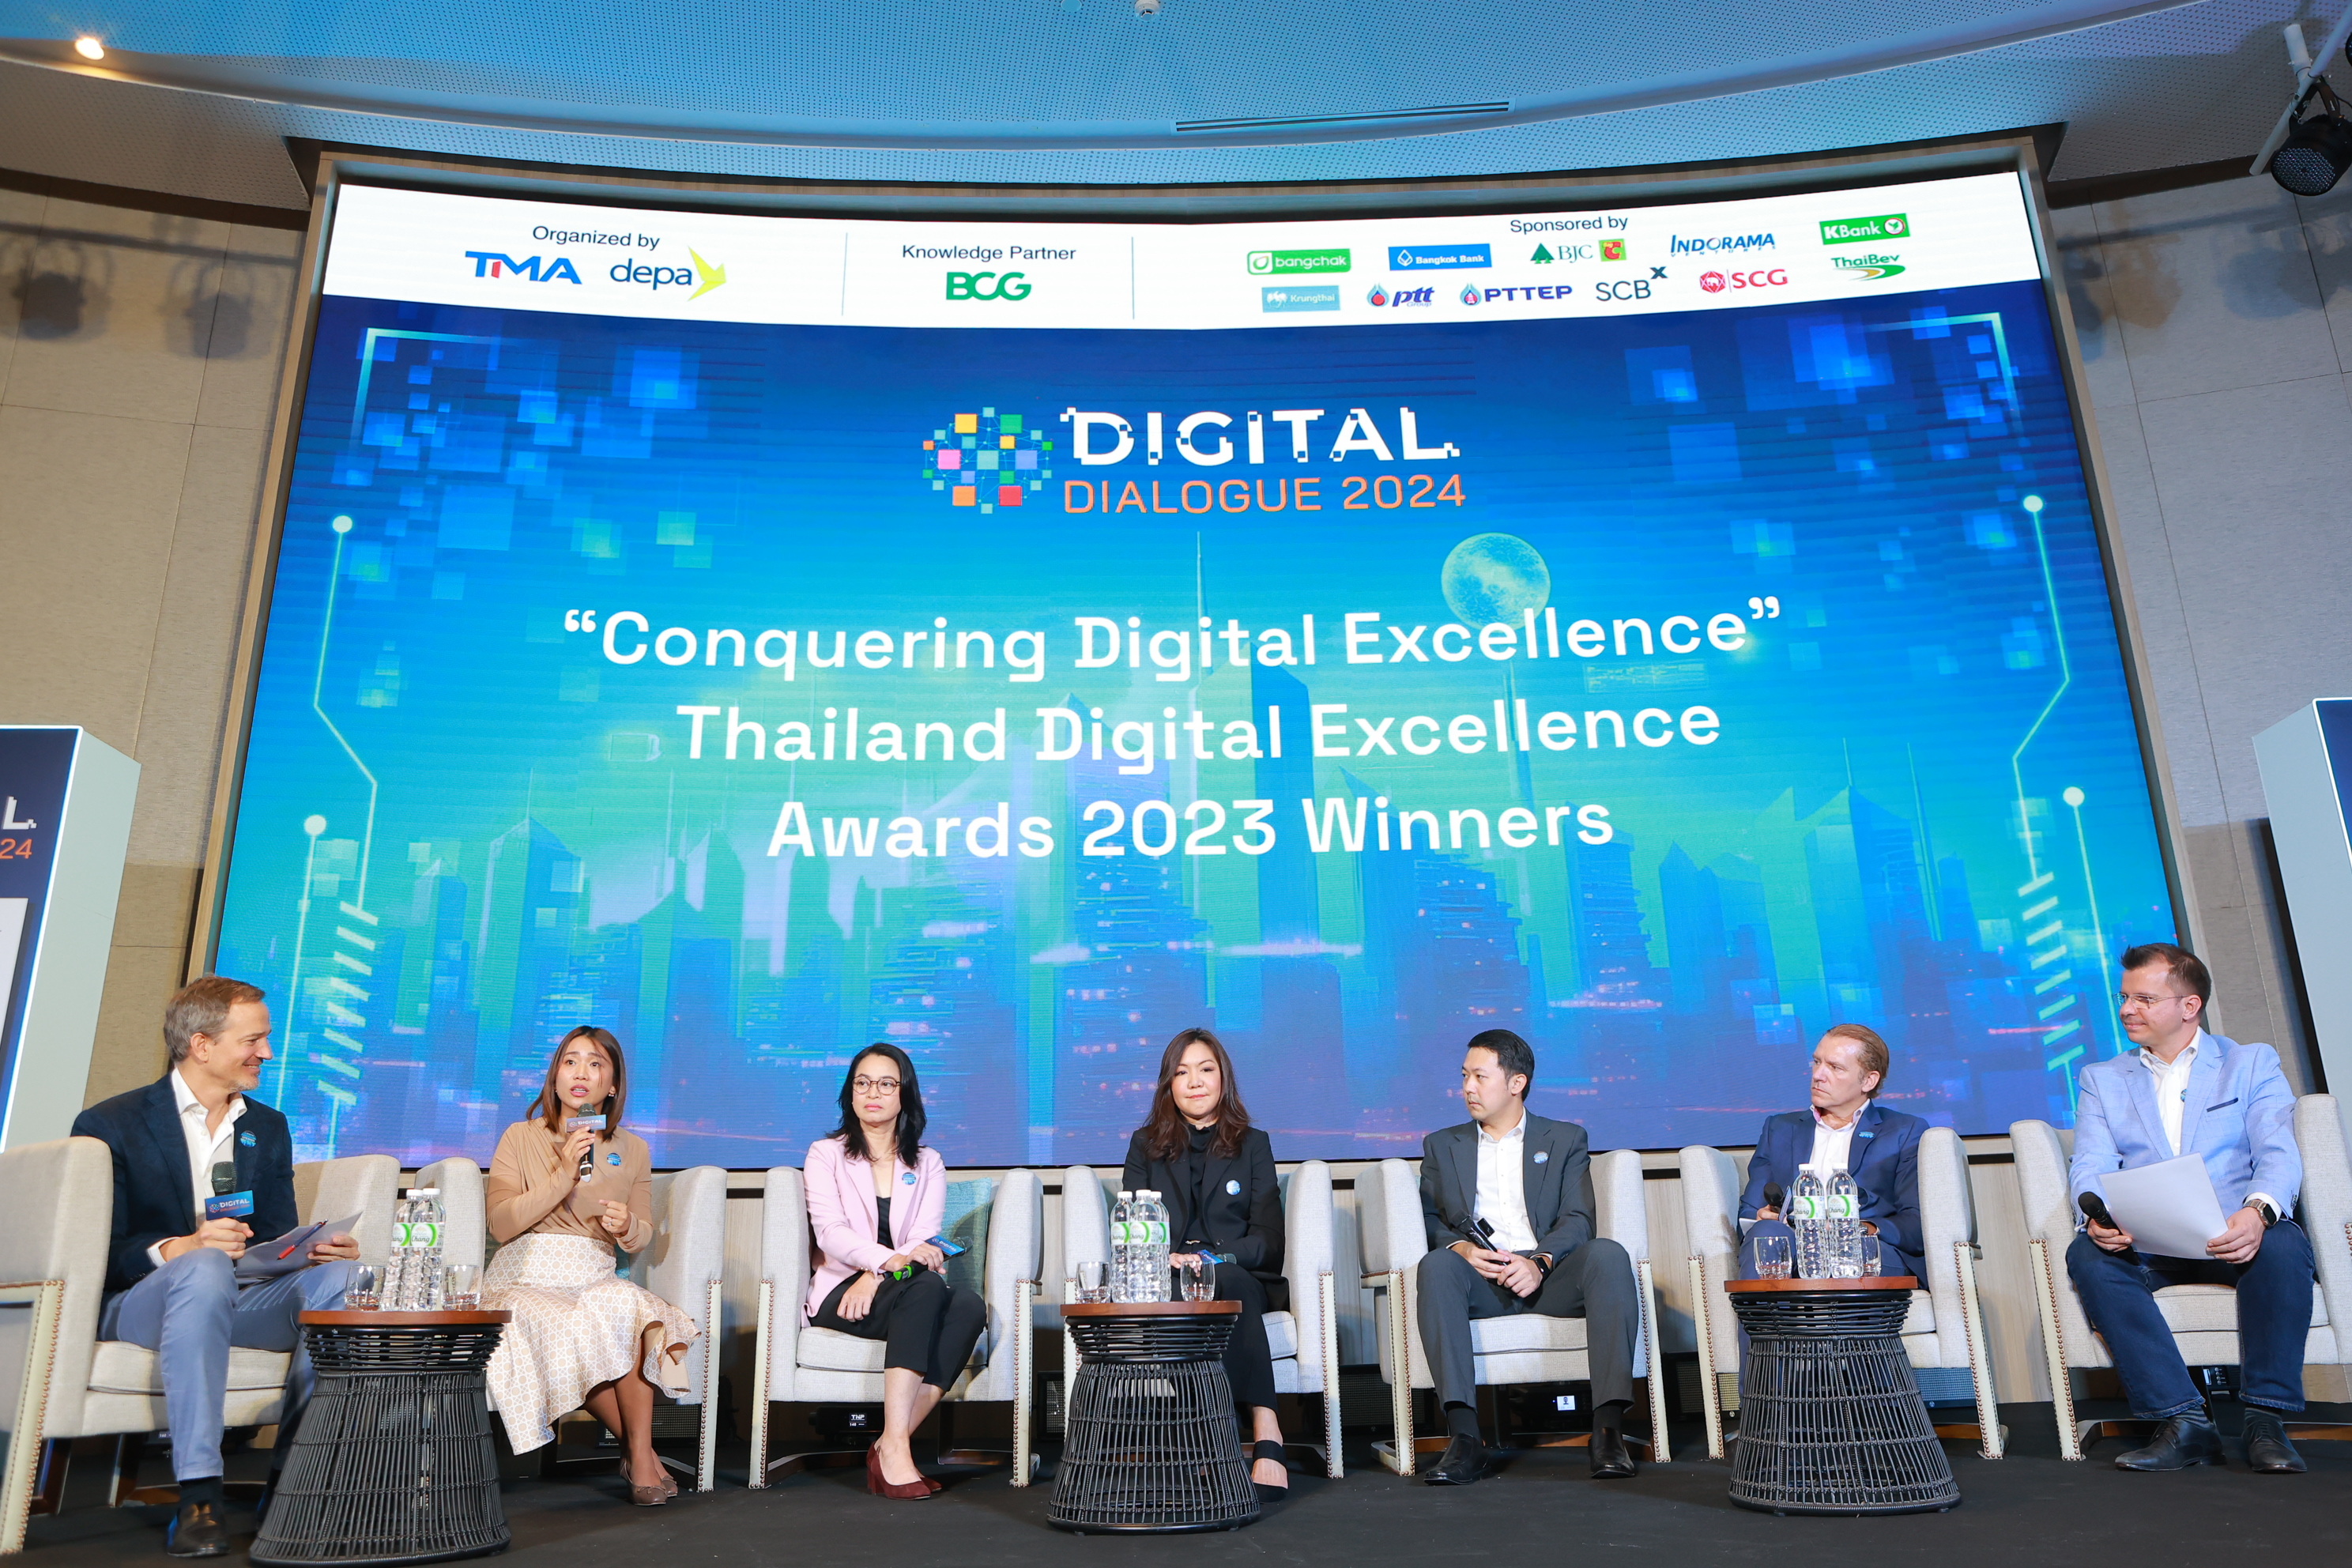 Summary of the first day of Digital Dialogue 2024